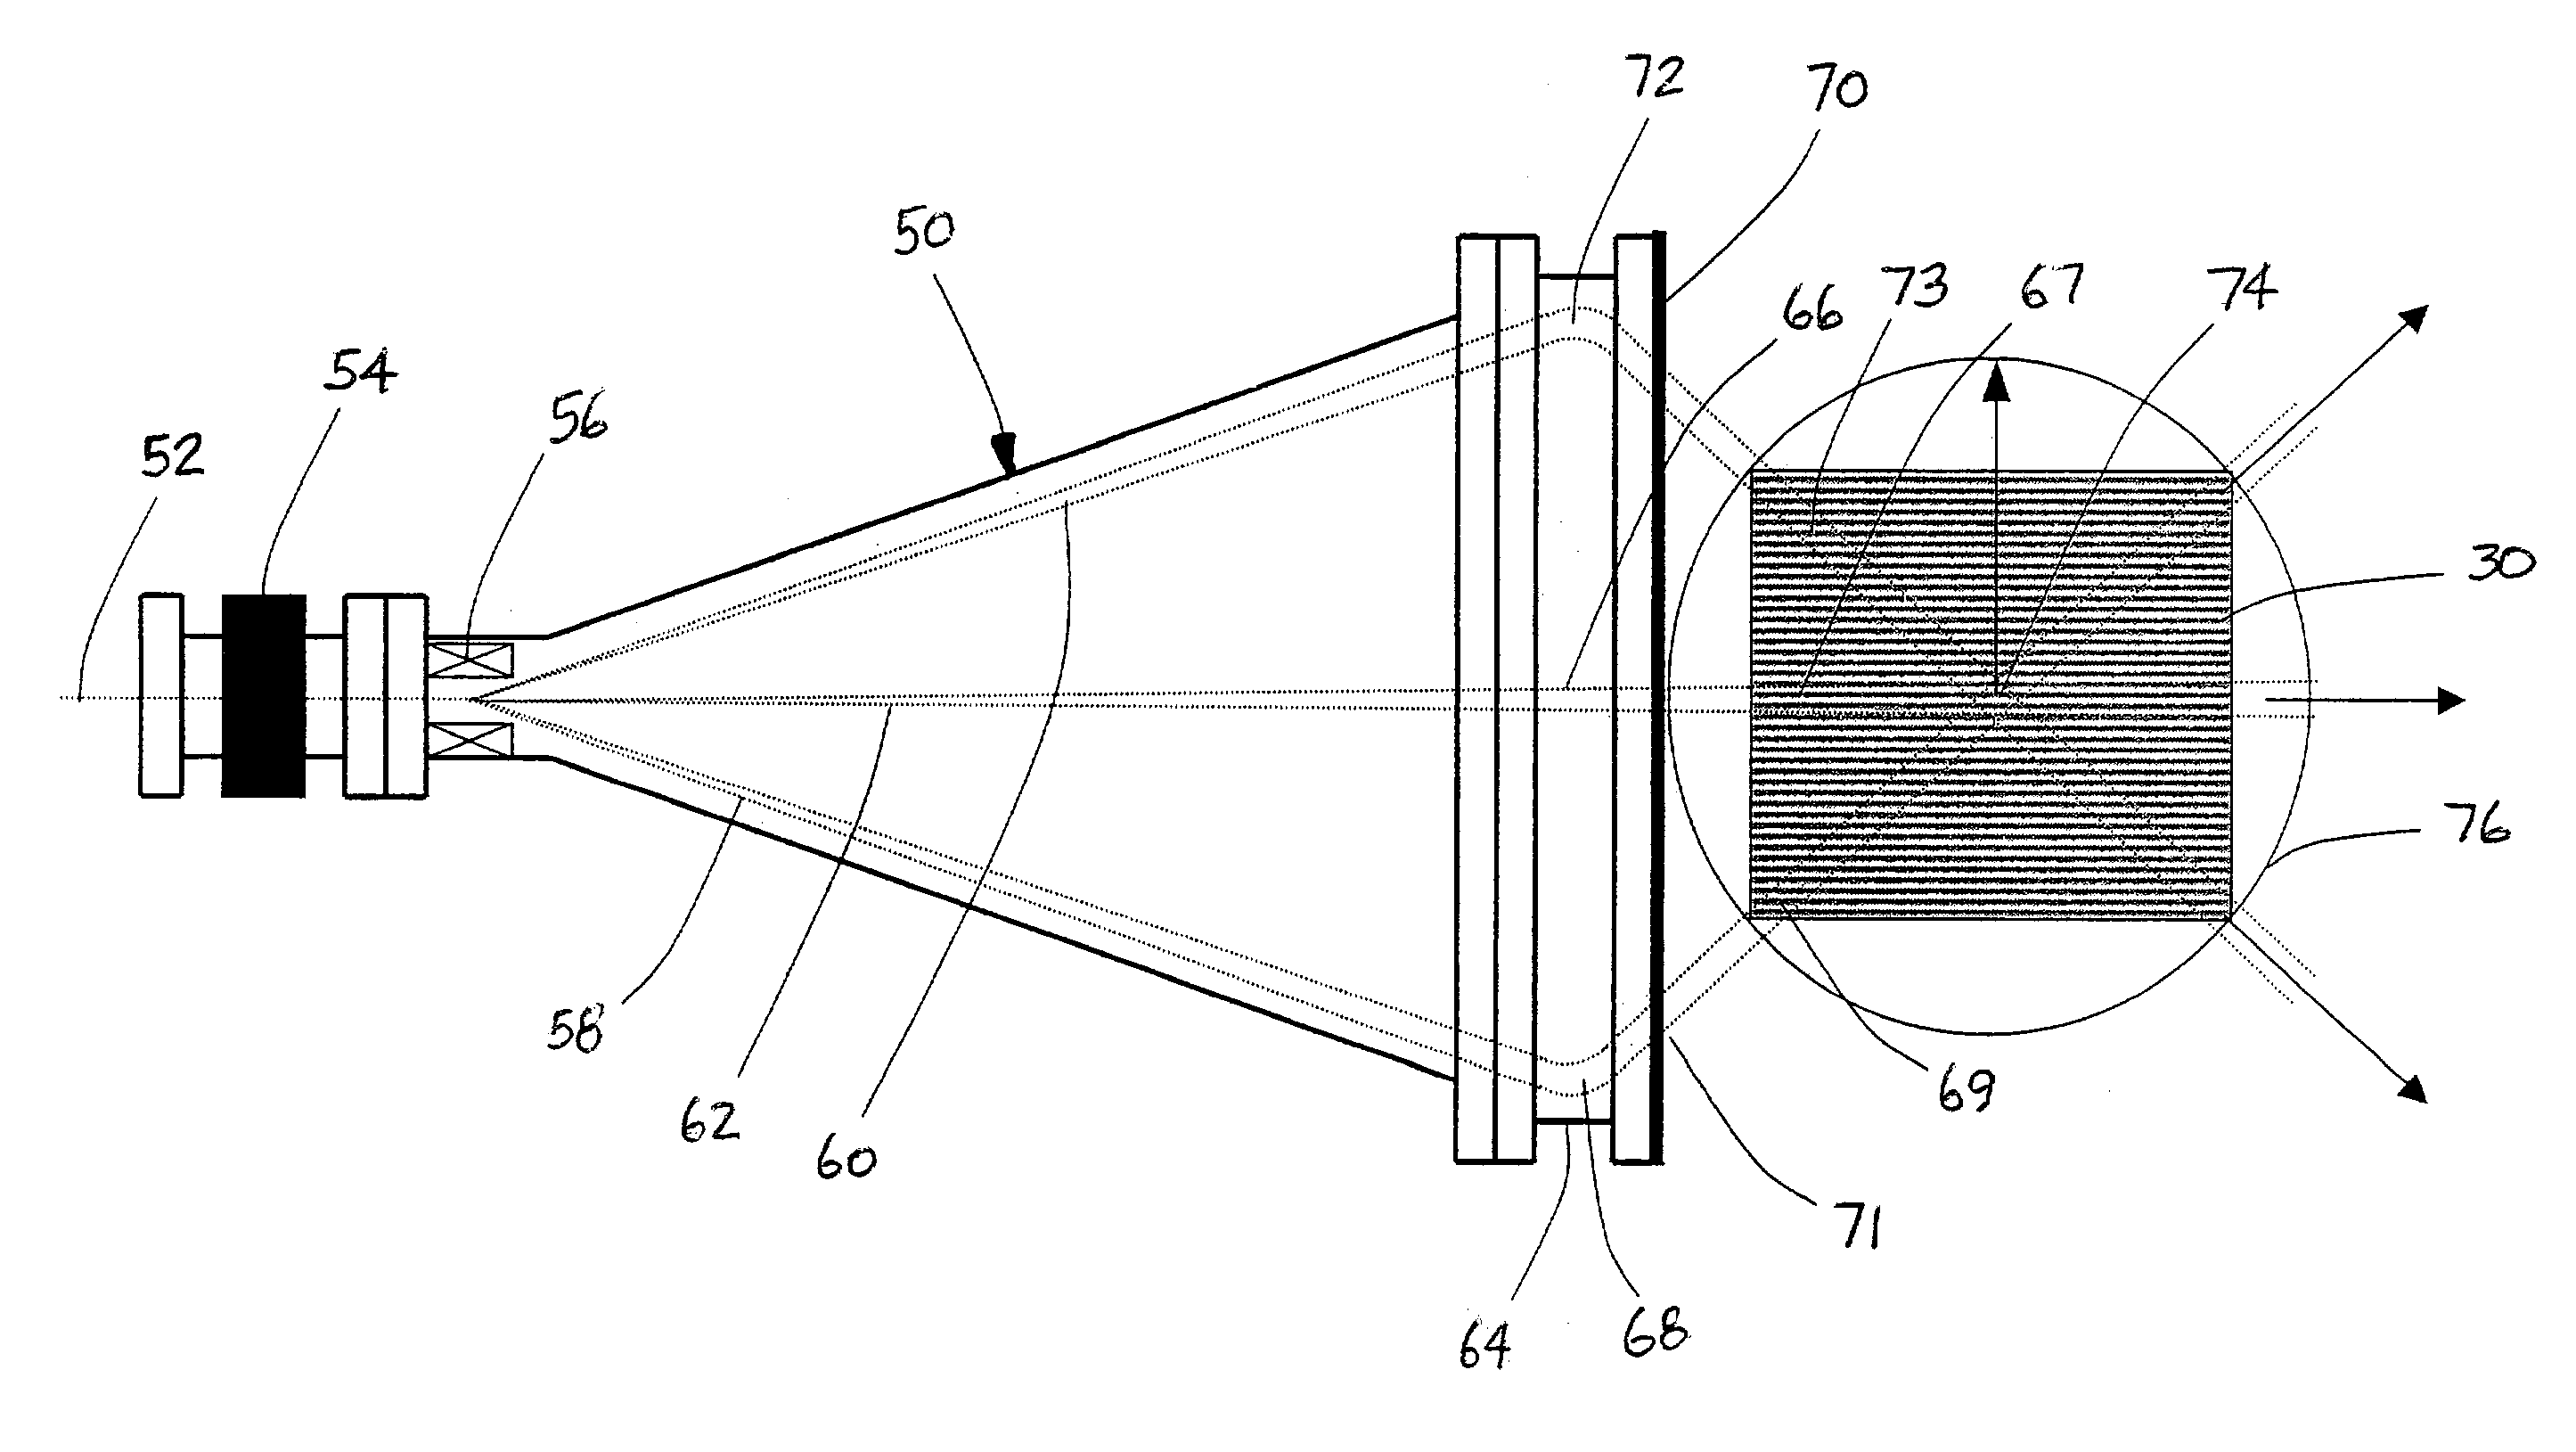 System and method for irradiating large articles